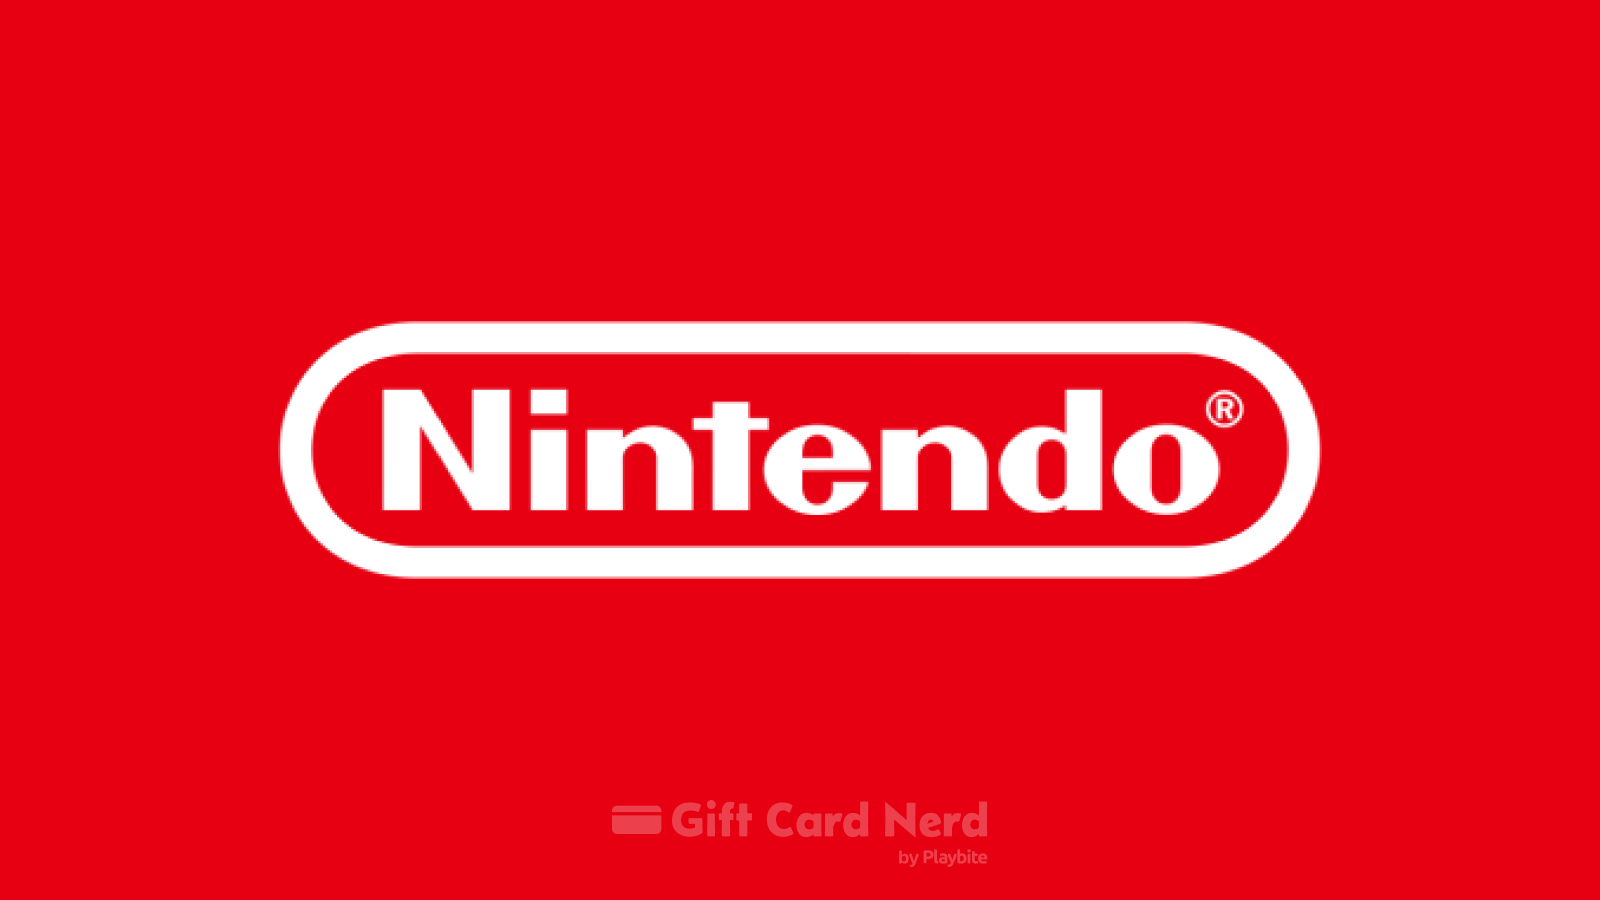 Can I Use a Nintendo Gift Card on Uber Eats?